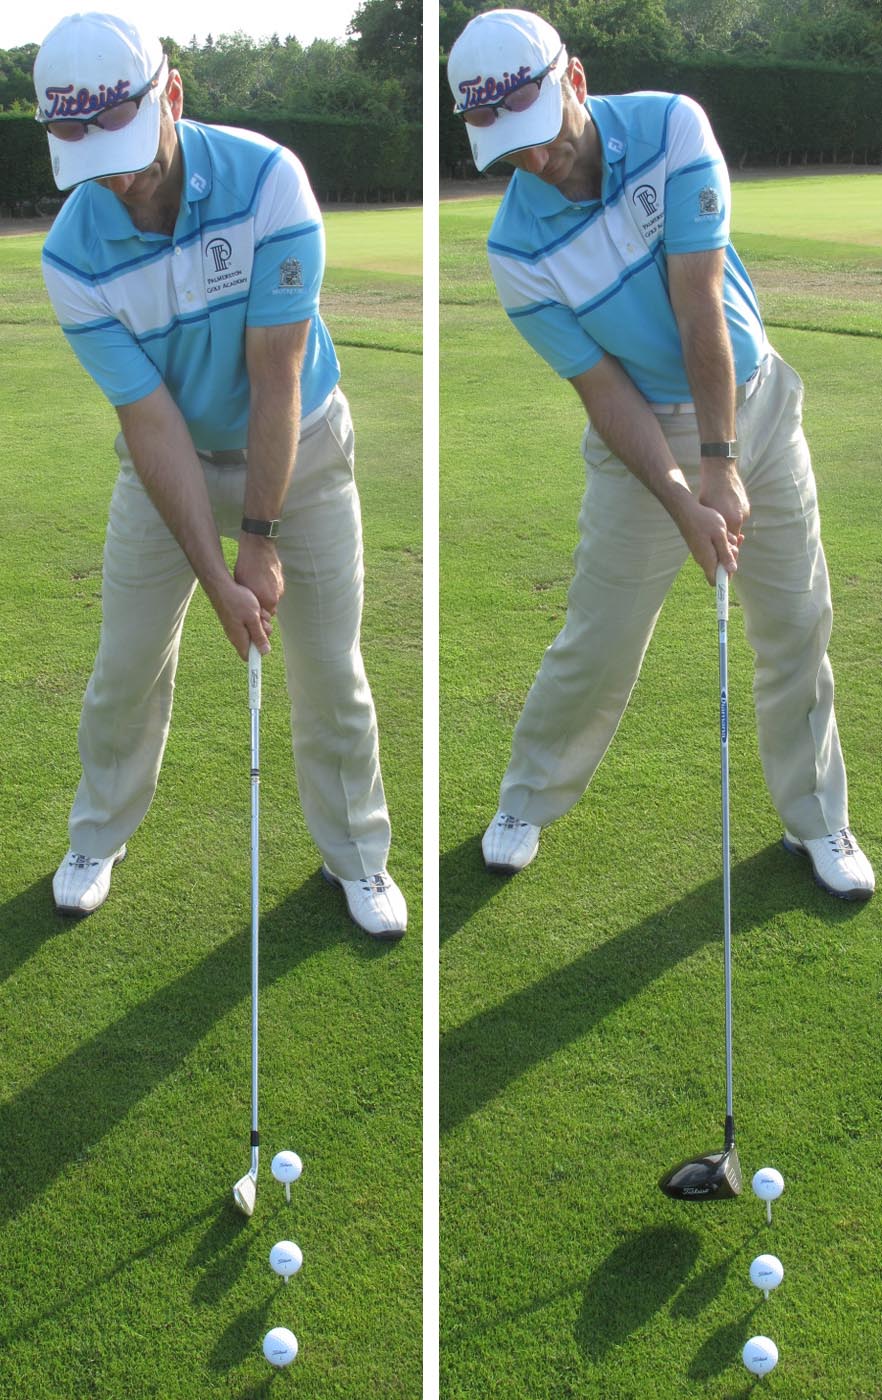 Use an iron or driver to exaggerate hitting up on the ball 